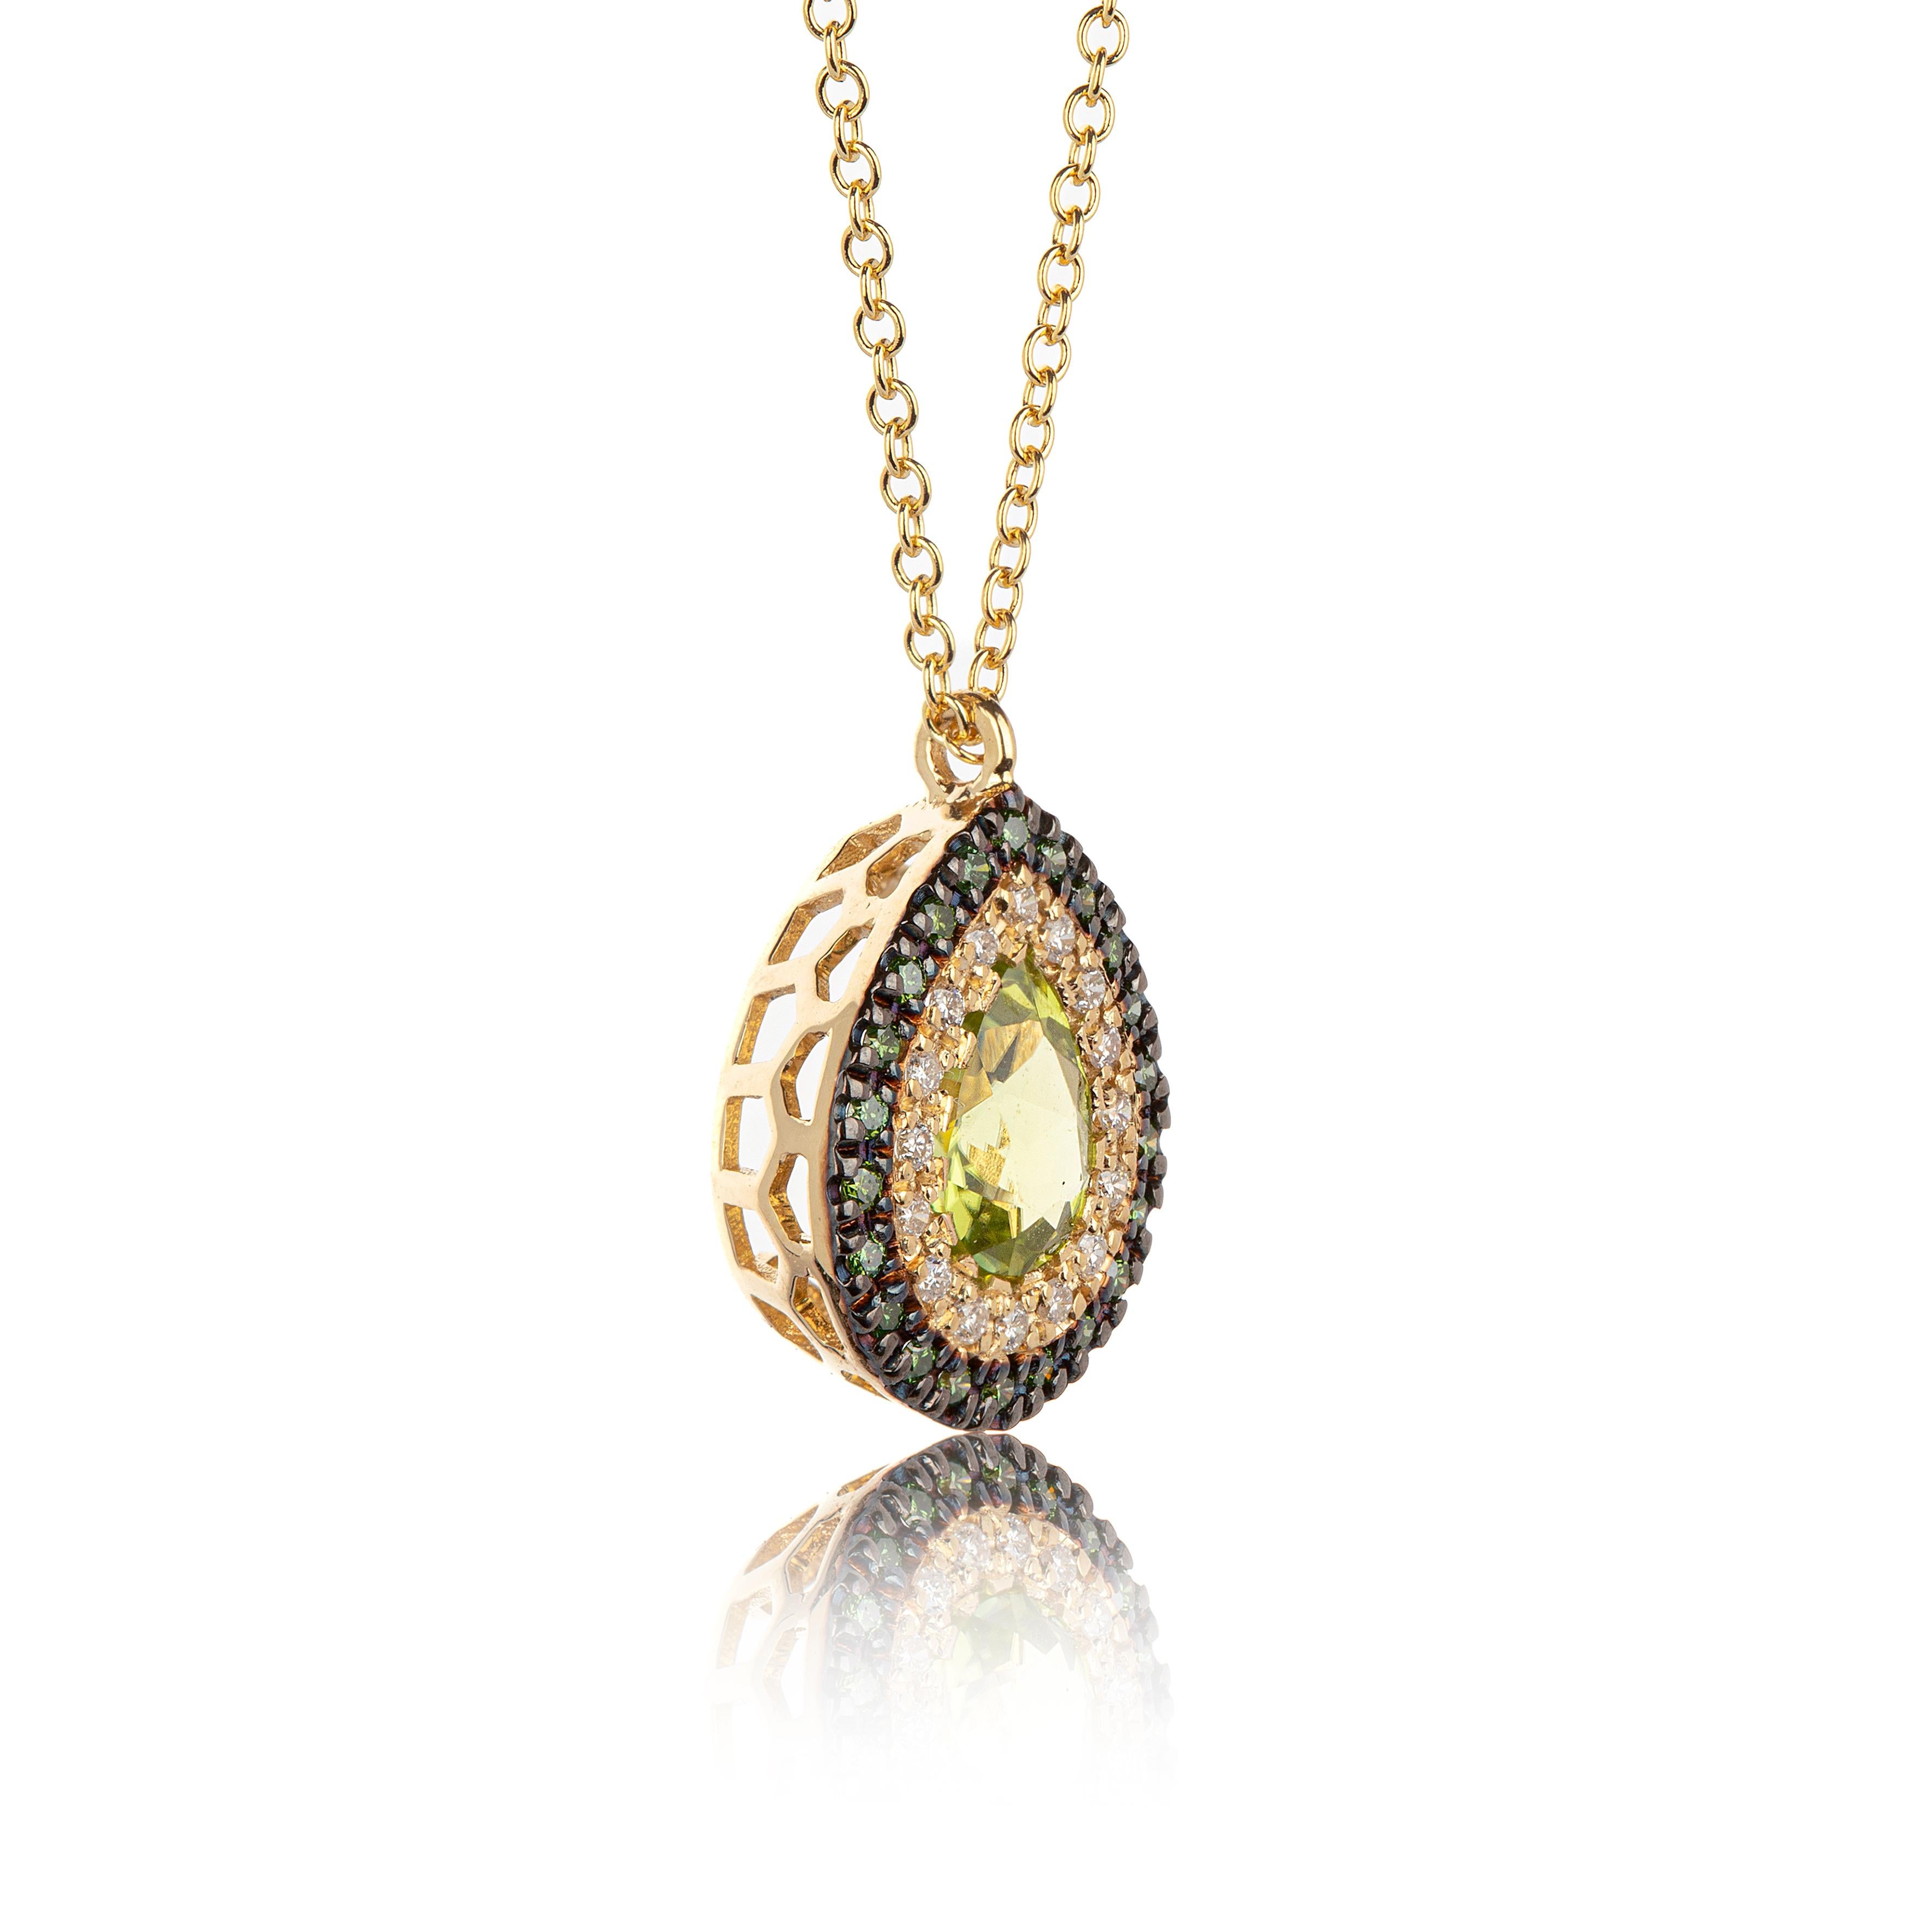 Green Peridot Pear Shape Necklace in 18Kt Yellow Gold with pave  Diamonds. The stones are blue and white diamonds pave setting and the peridot in the center of the necklace is pear cut.
The blue and white diamonds that surround the central peridot 